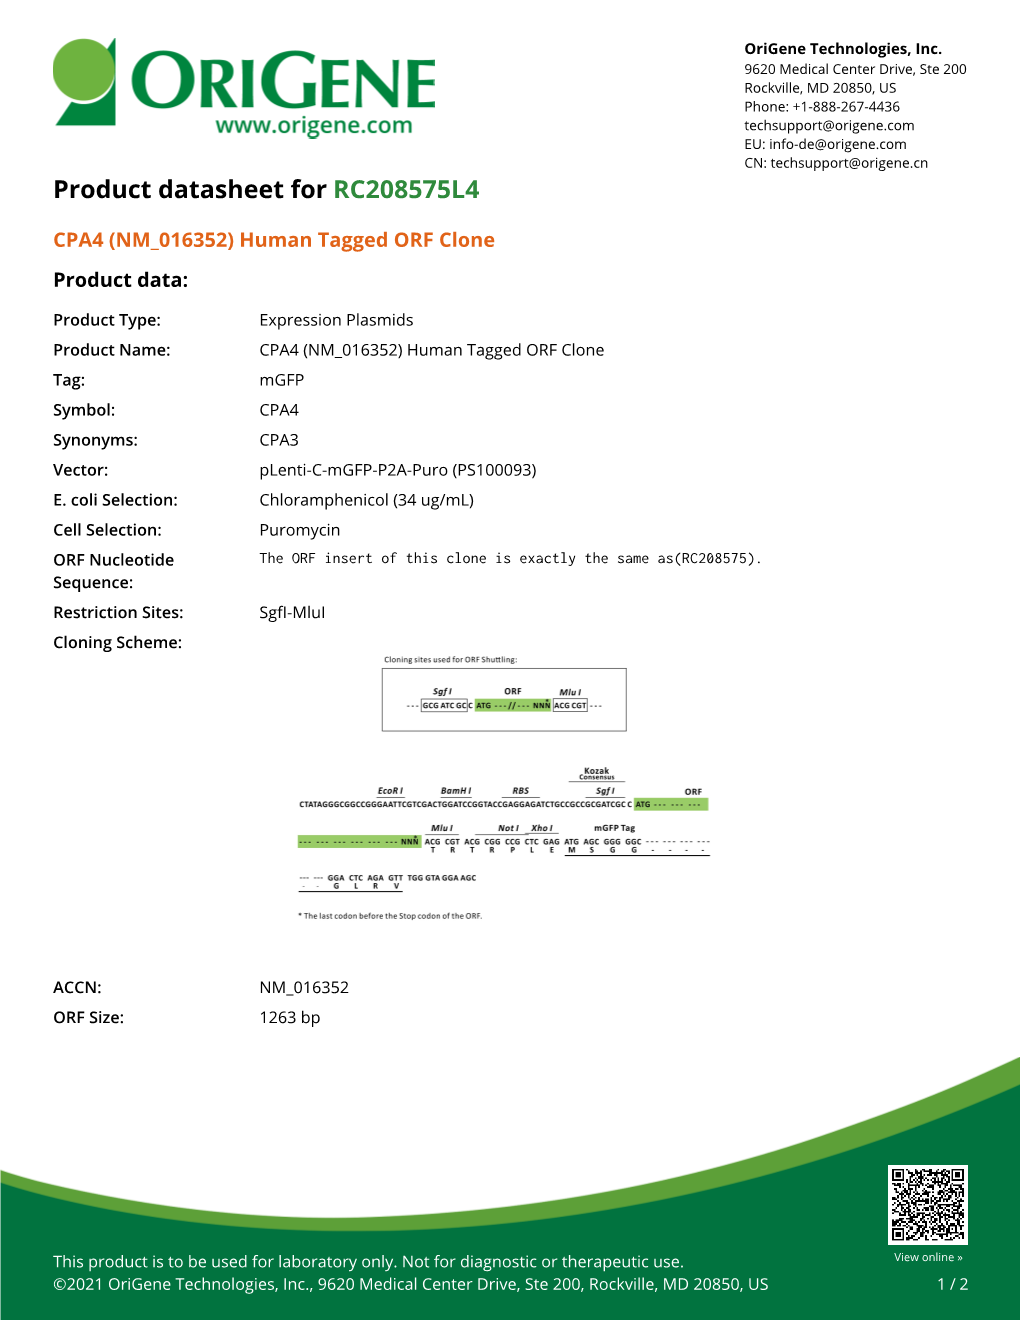 CPA4 (NM 016352) Human Tagged ORF Clone Product Data